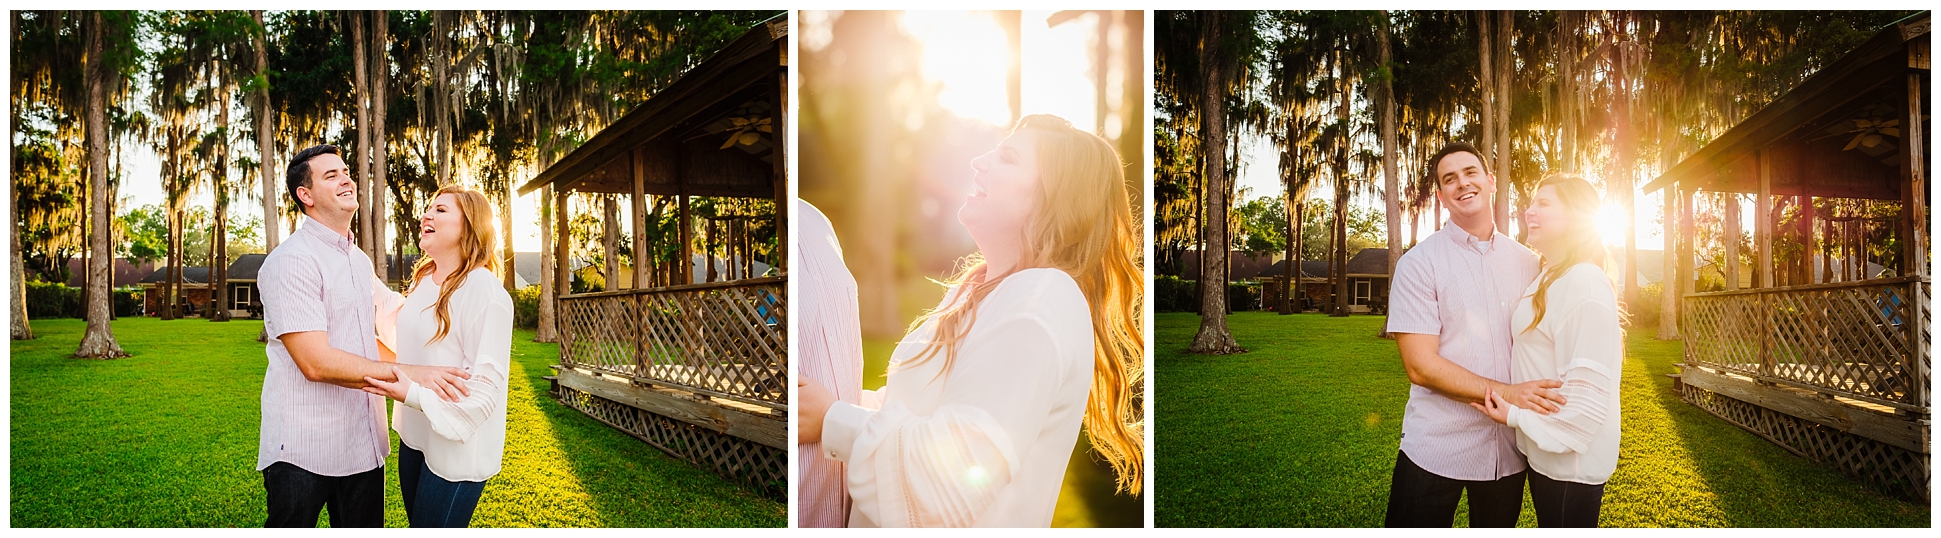 at-home-carrollwood-engagement-photos-tampa_0085.jpg